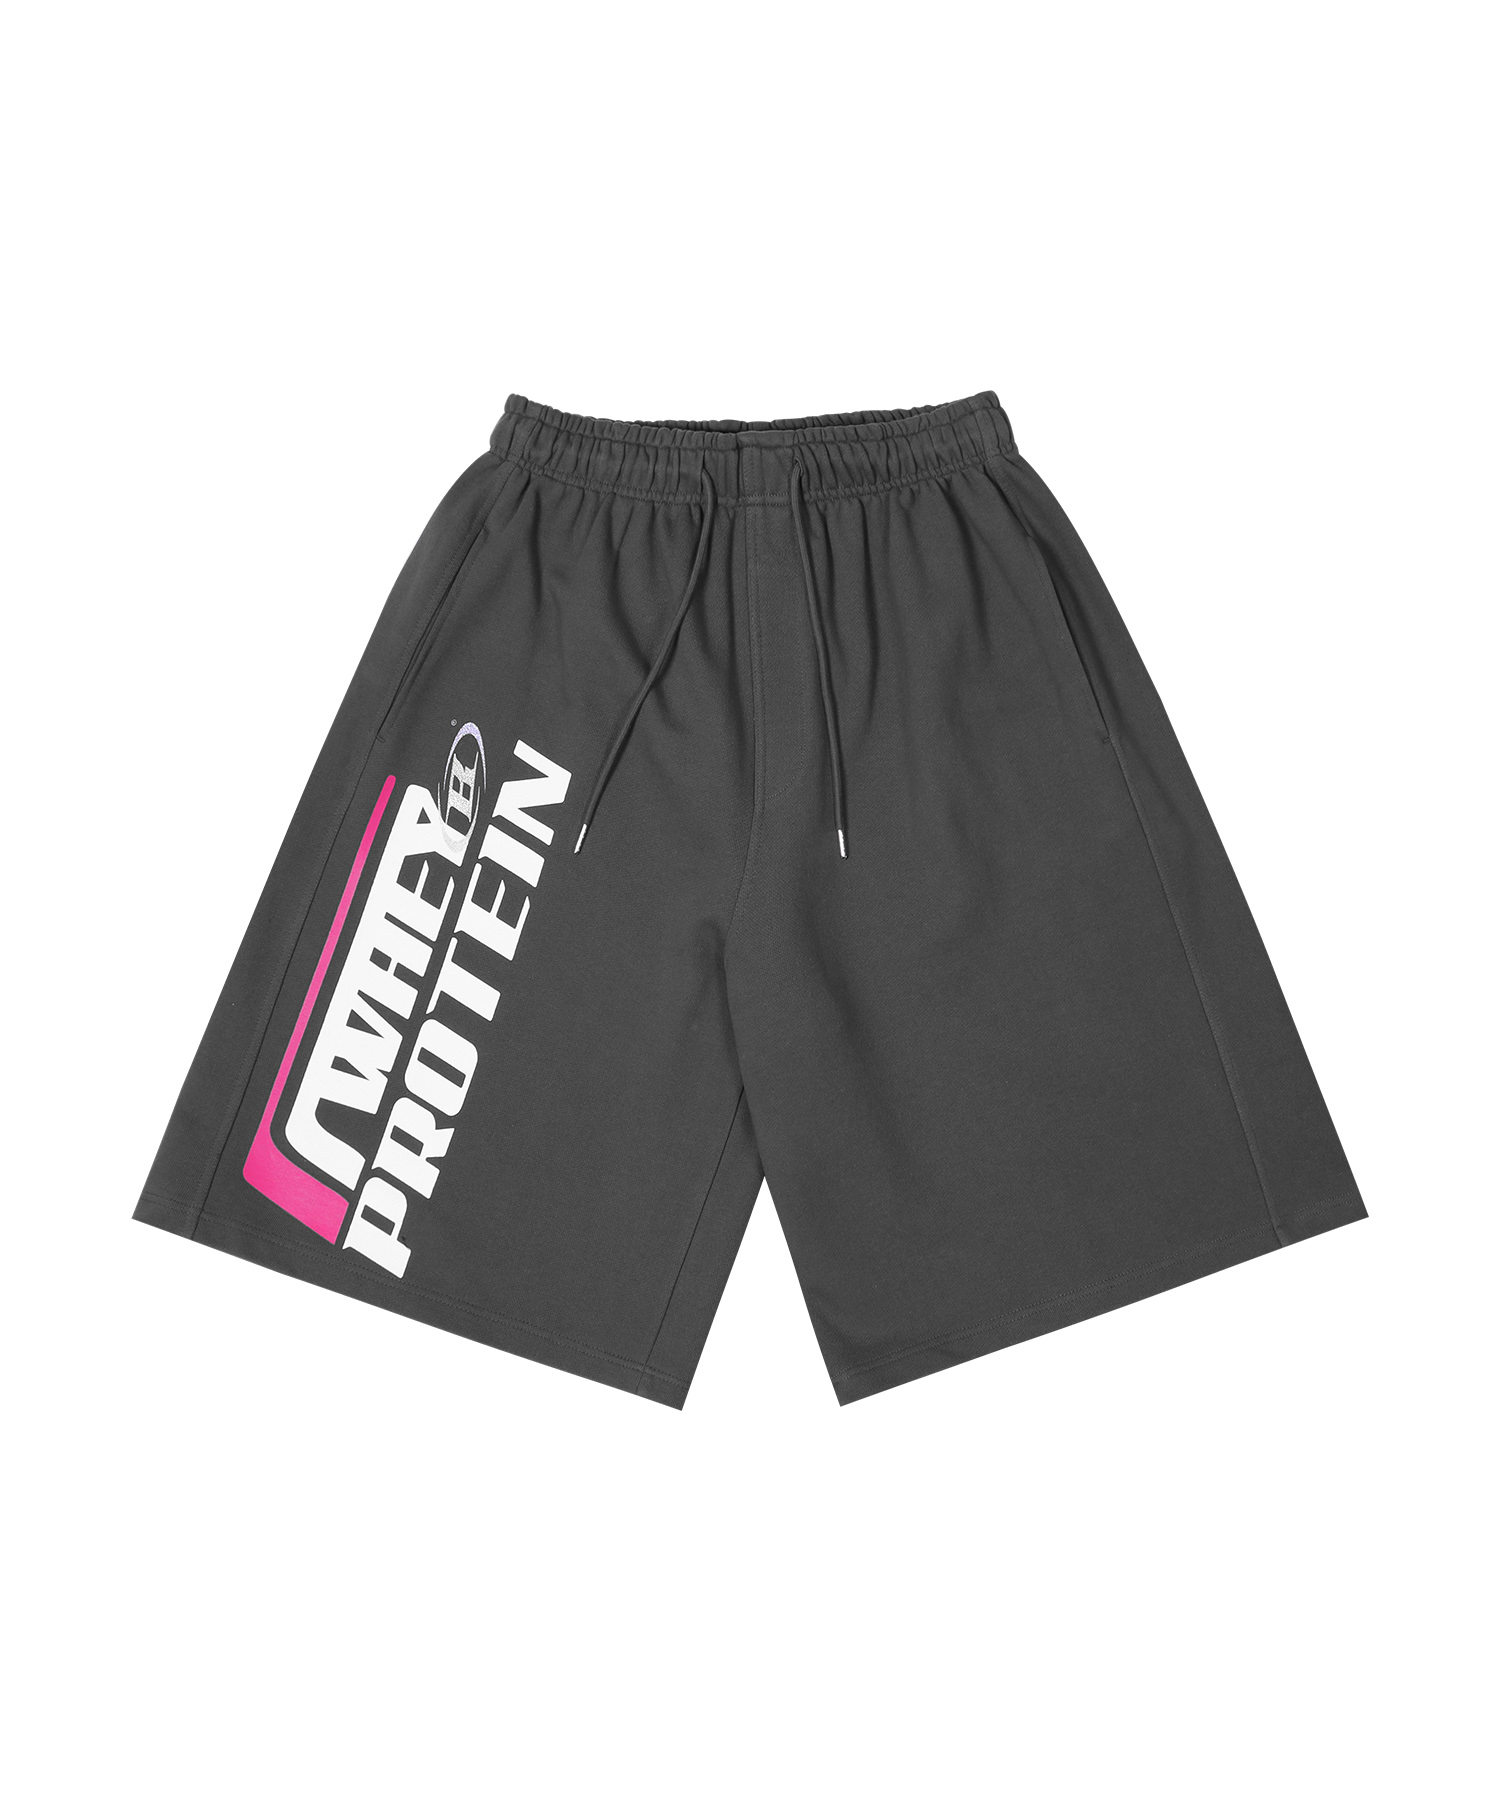 WHEY PROTEIN HALF PANTS [CHARCOAL]